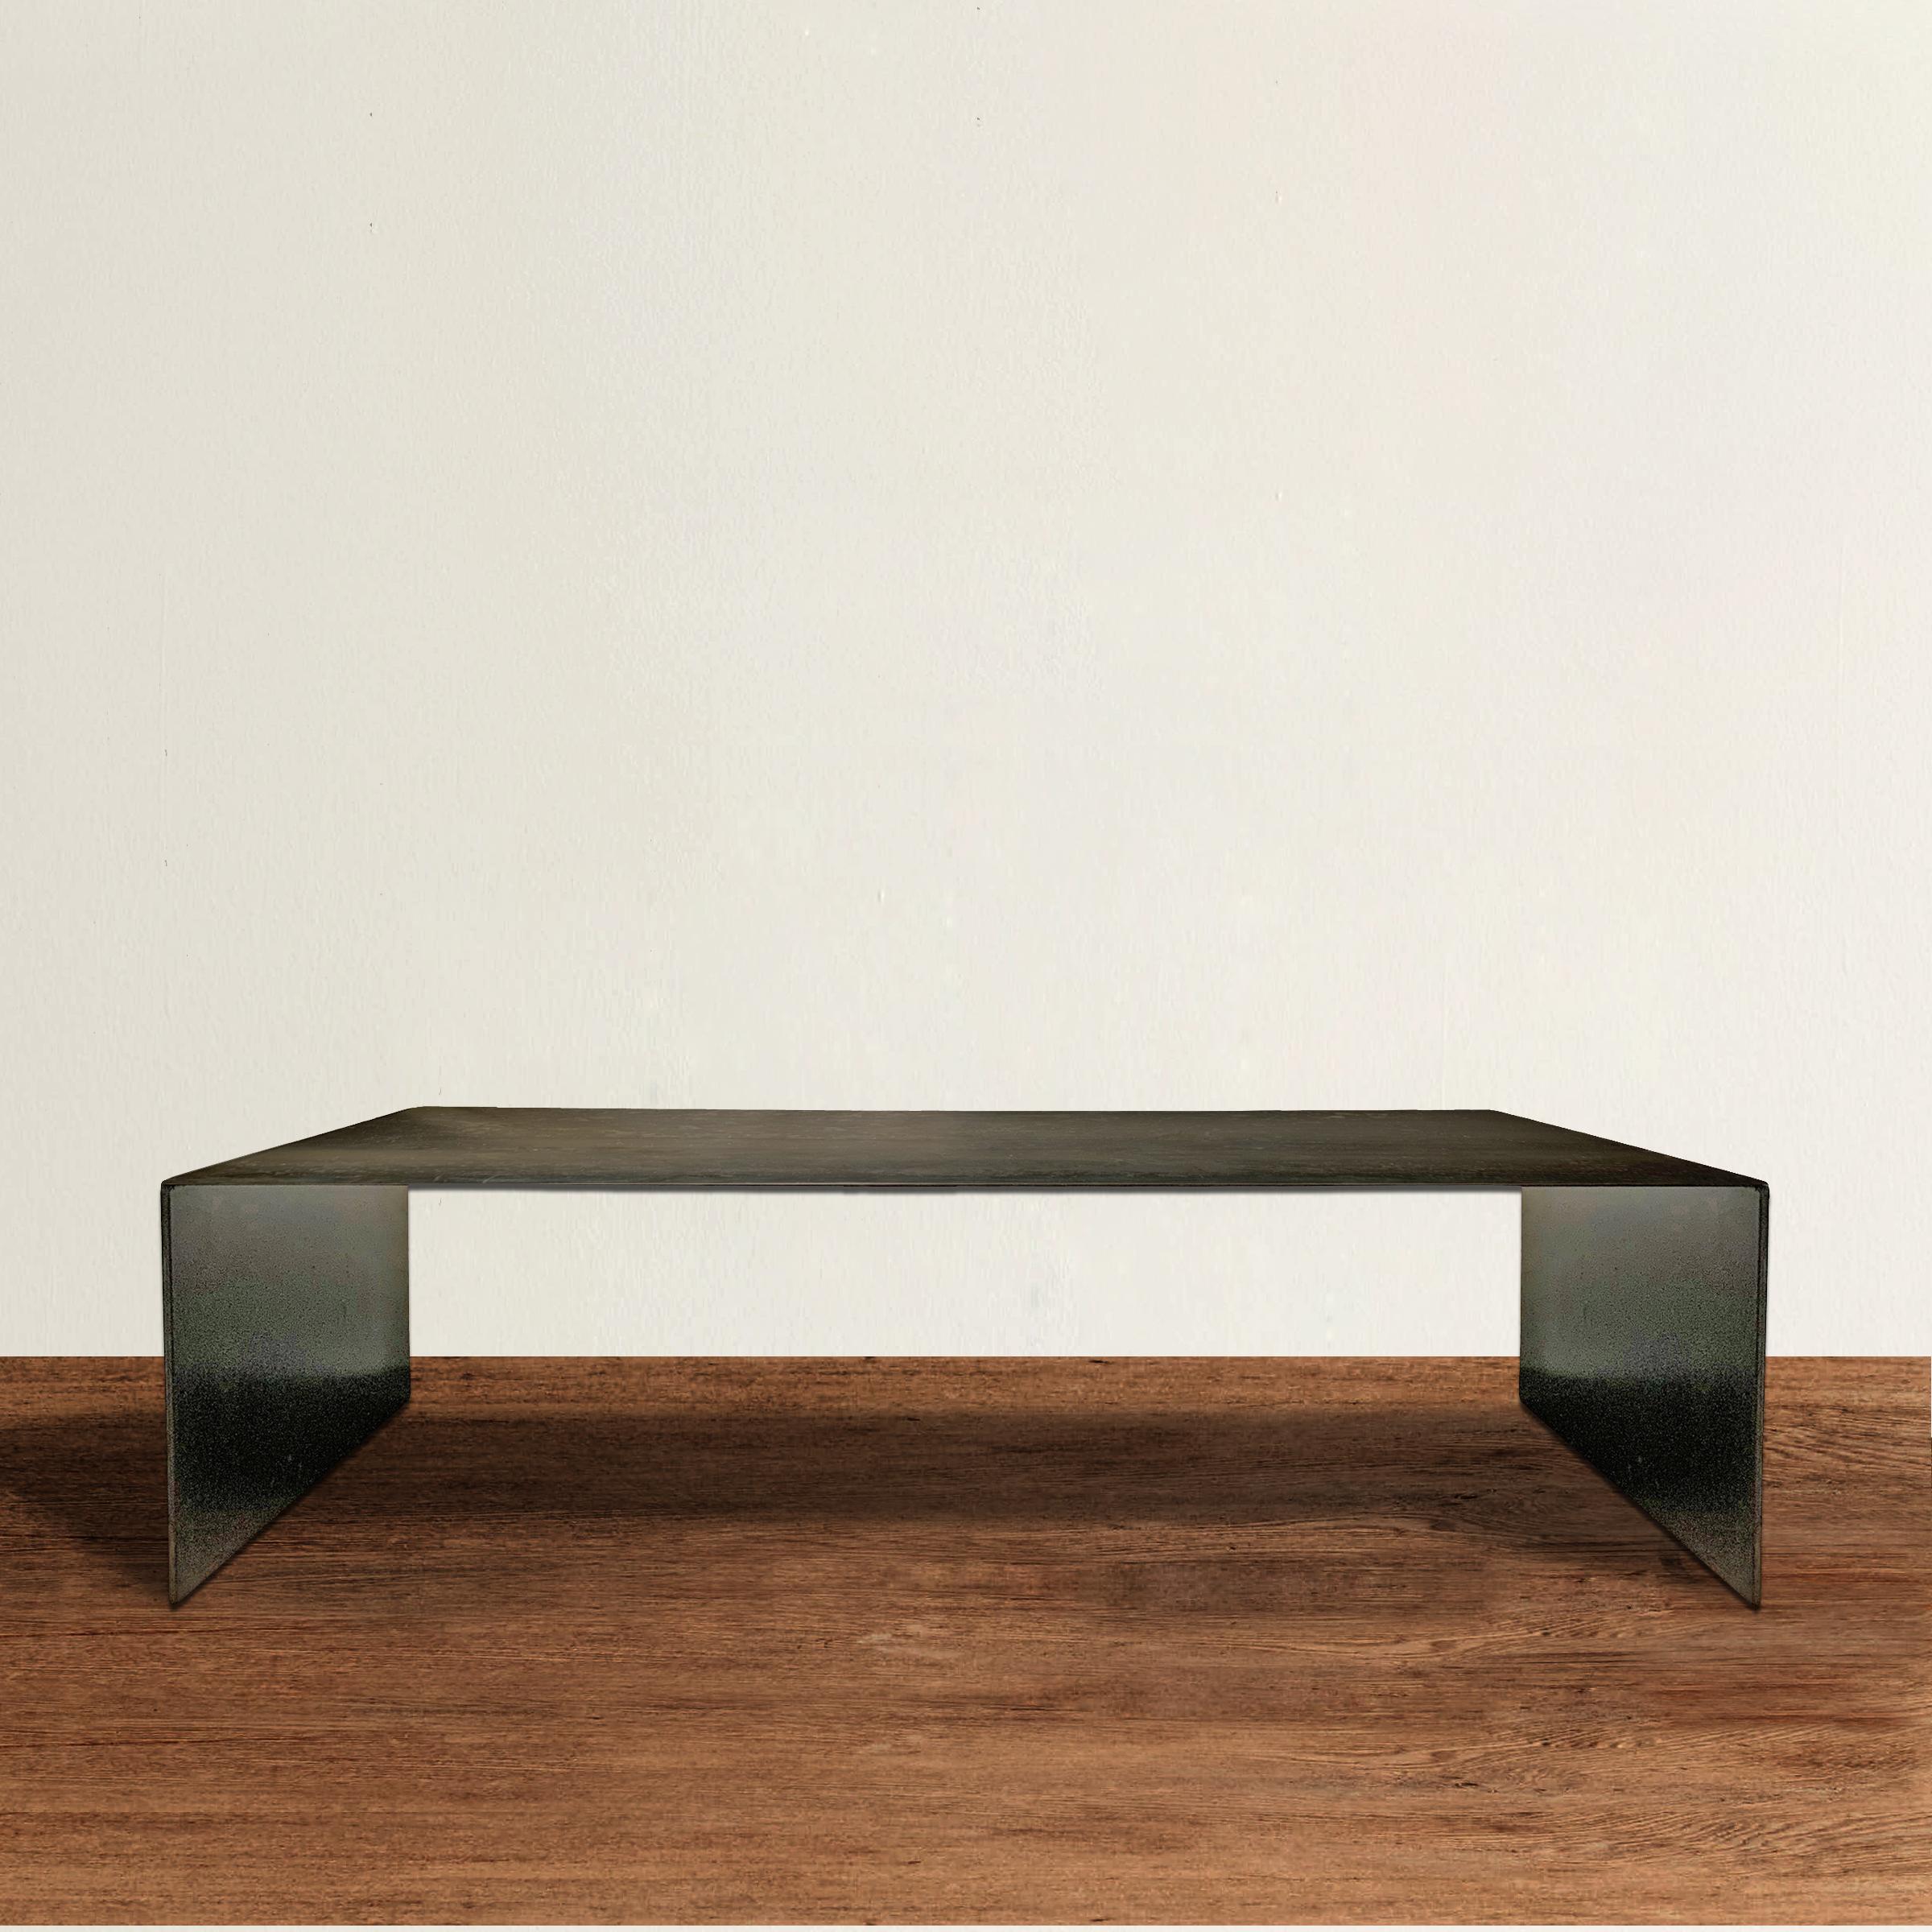 A strong and tenacious contemporary steel coffee table with a Brutalist's soul and a minimalist's attitude. Table is constructed of one piece of steel, with waterfall edges, and the finish is wonderfuly aged and distressed. Because of the